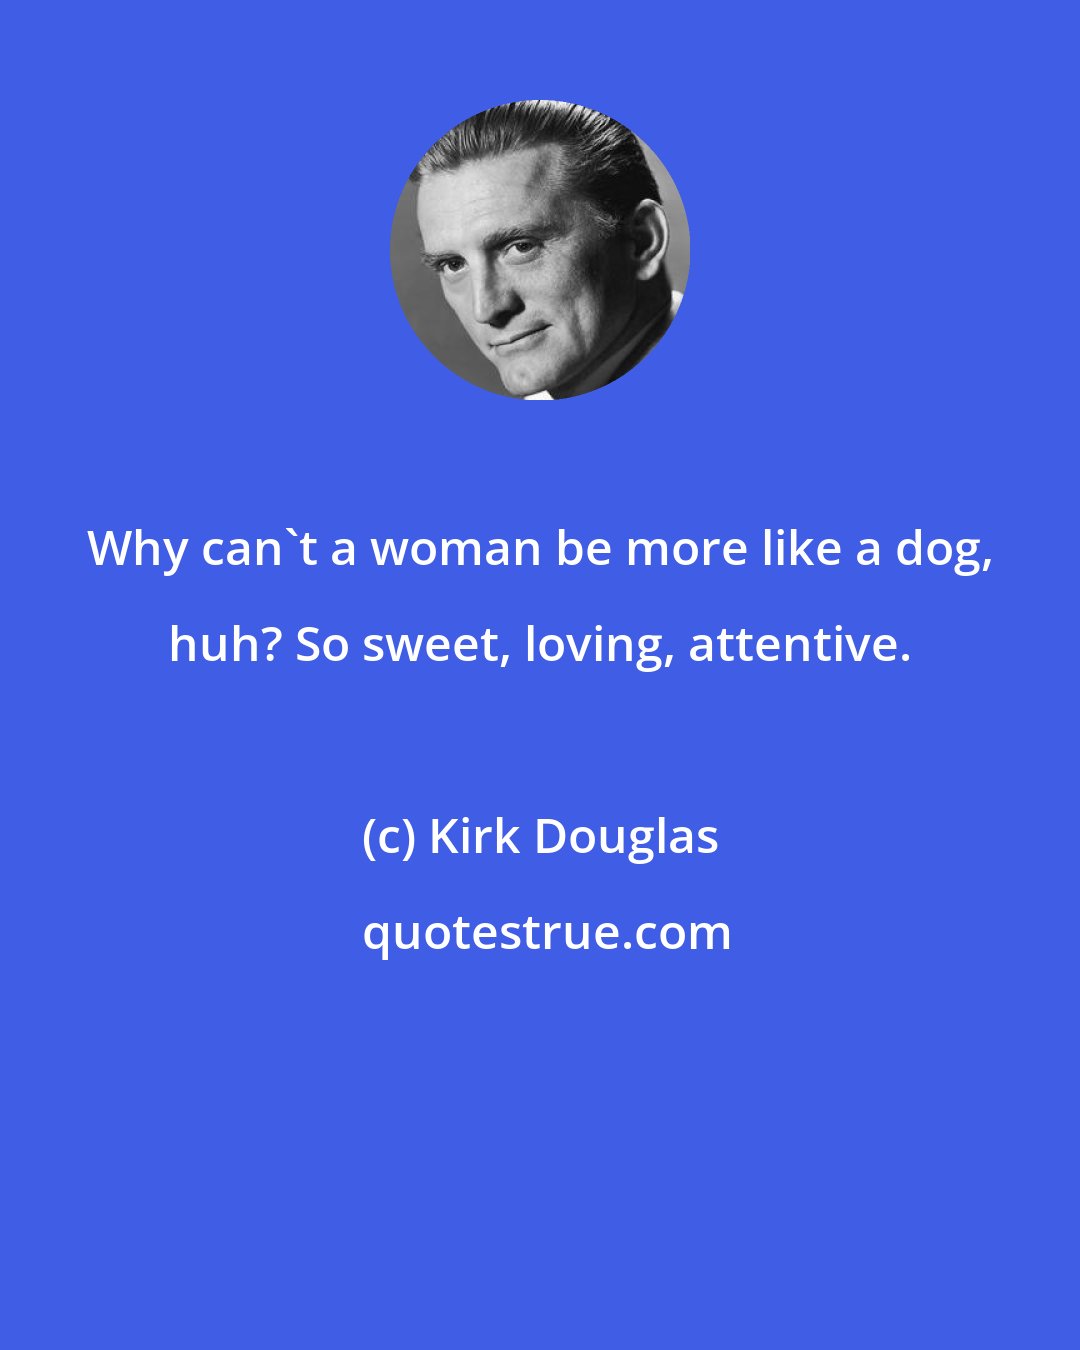 Kirk Douglas: Why can't a woman be more like a dog, huh? So sweet, loving, attentive.